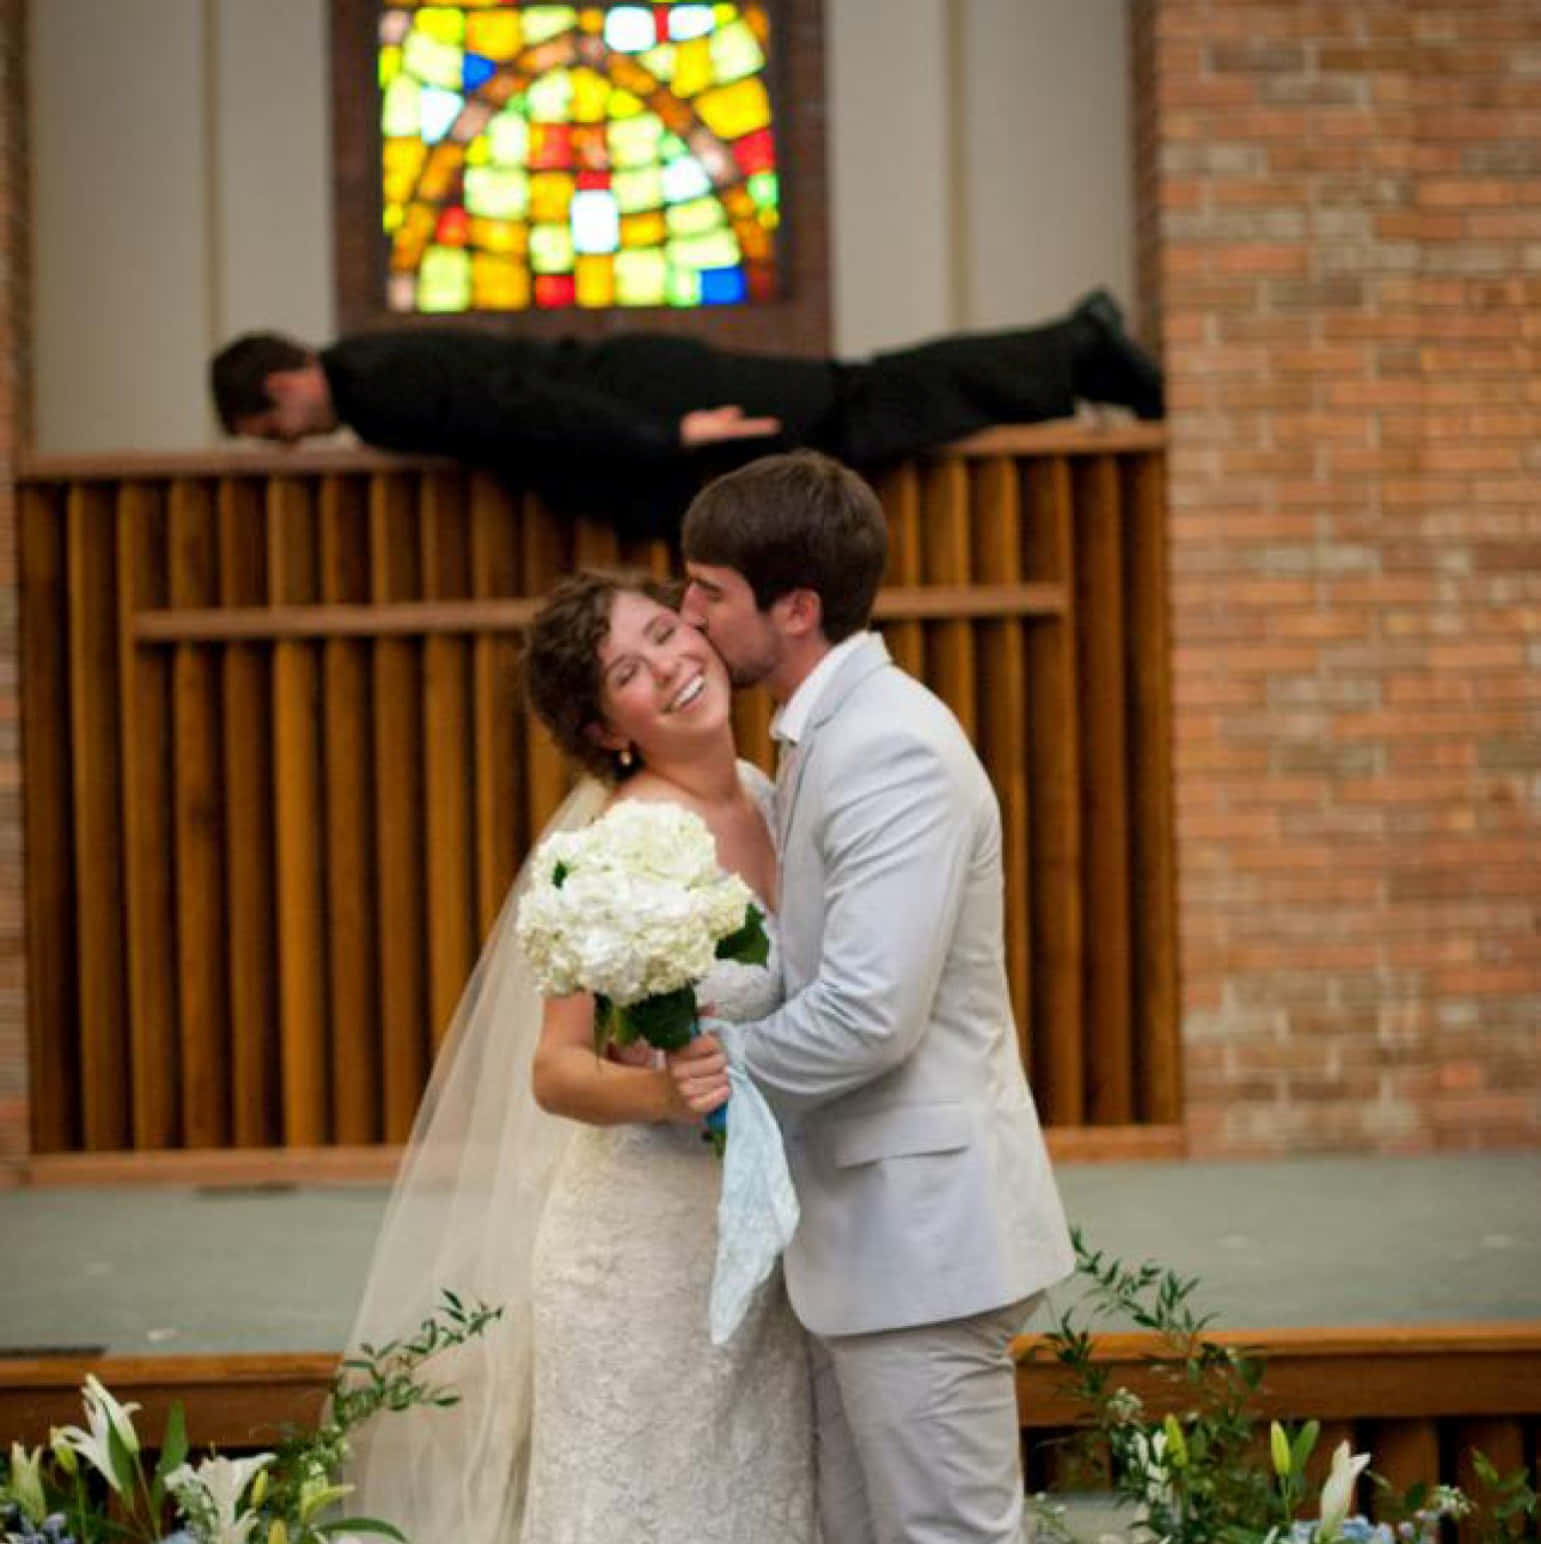 A Bride And Groom Kissing In Front Of A Stained Glass Window